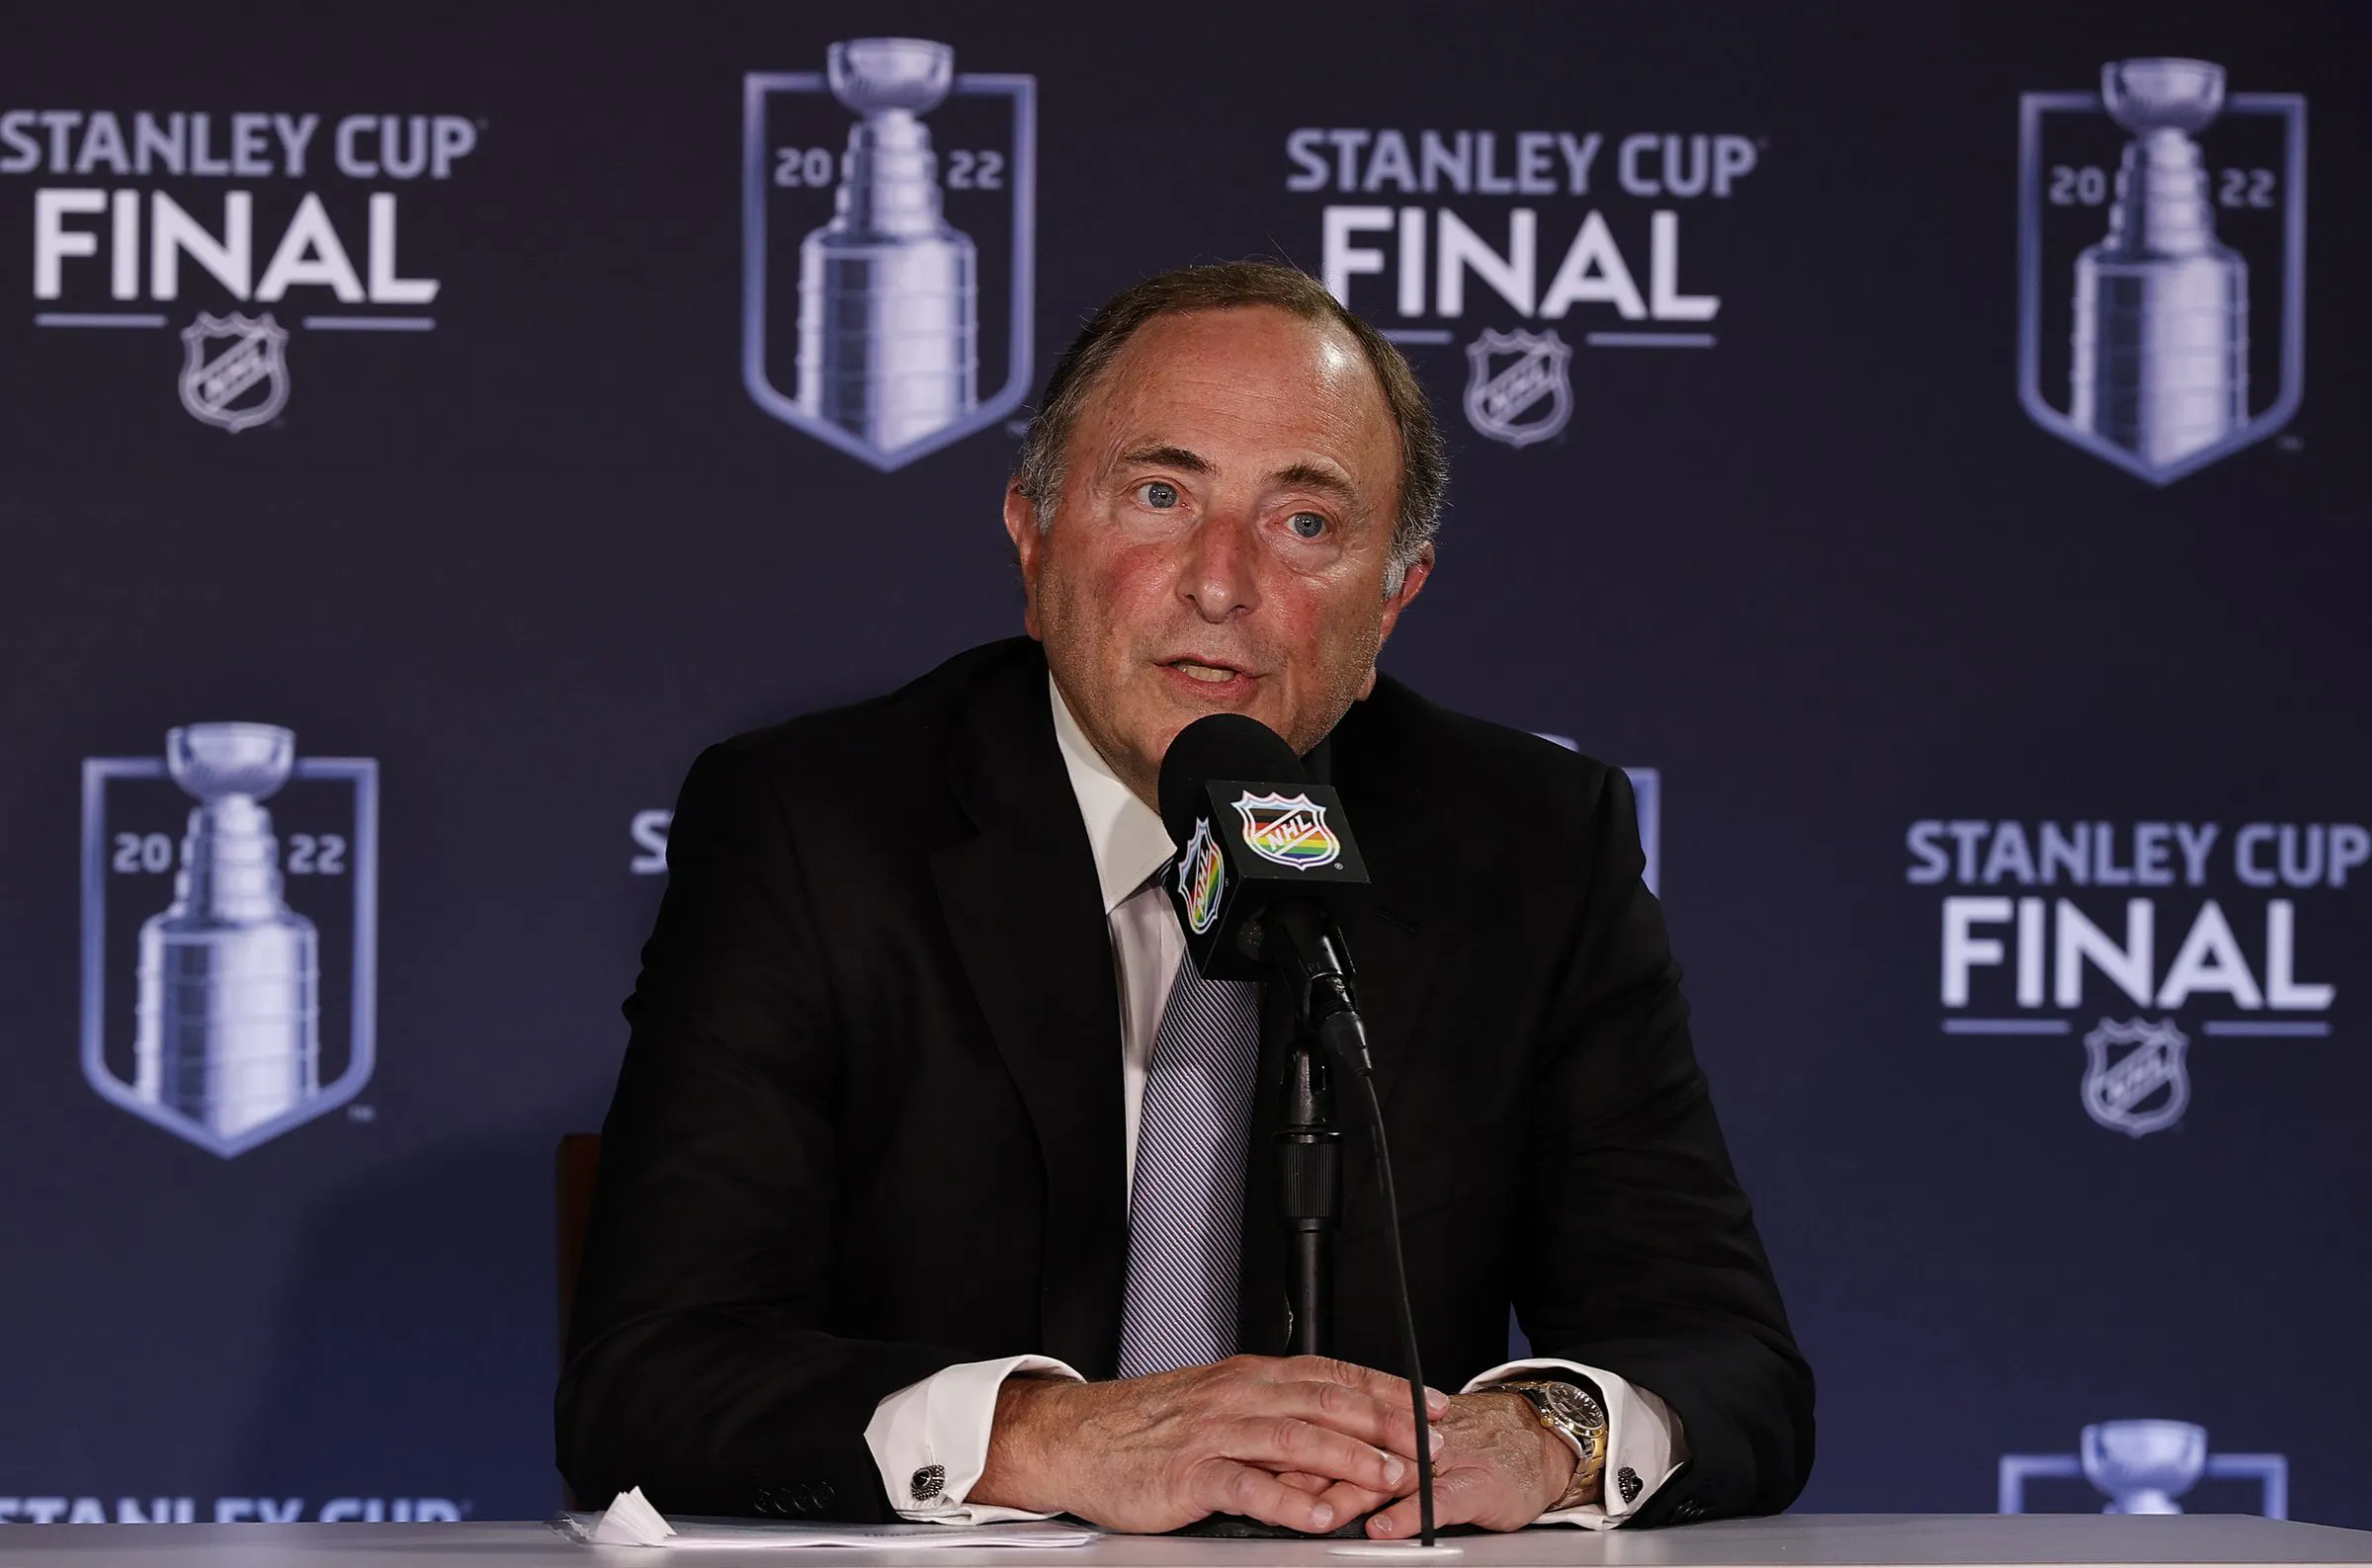 ‘He’s not eligible to come into the NHL’: Gary Bettman comments on Bruins signing Mitchell Miller